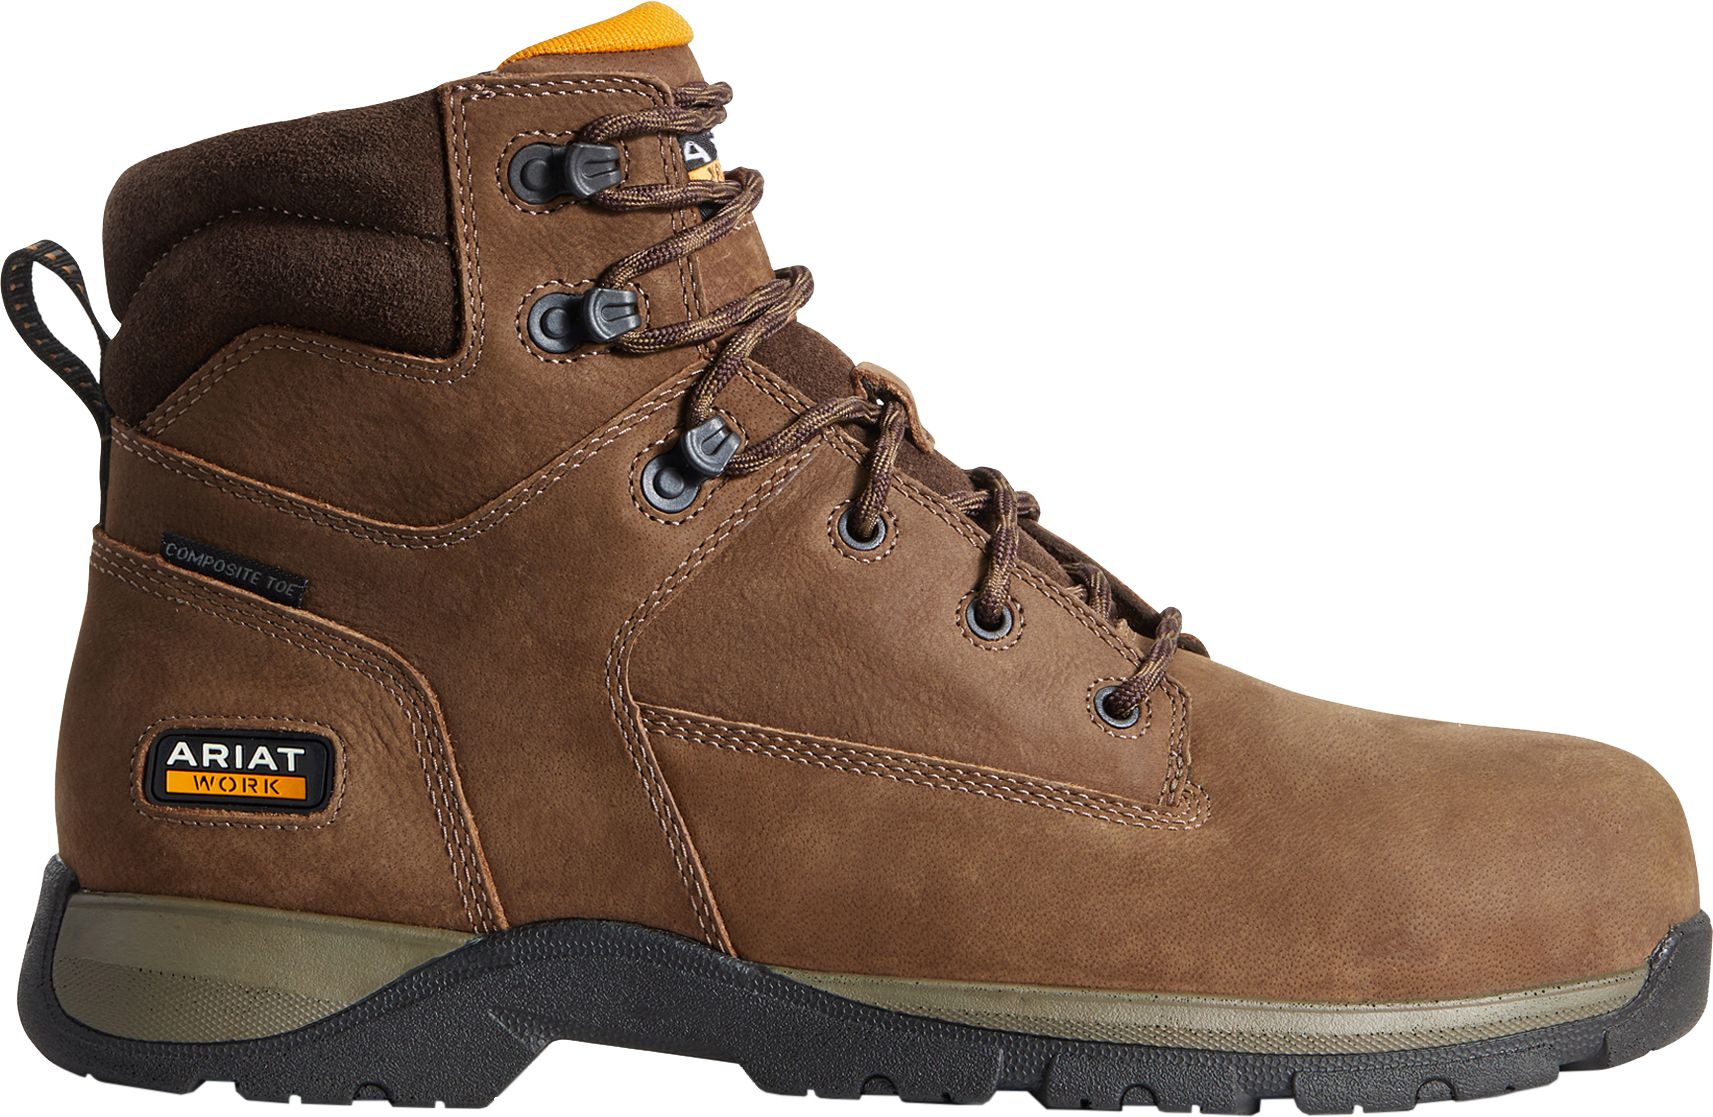 justin men's rustic barnwood waterproof hybred composition toe work boots